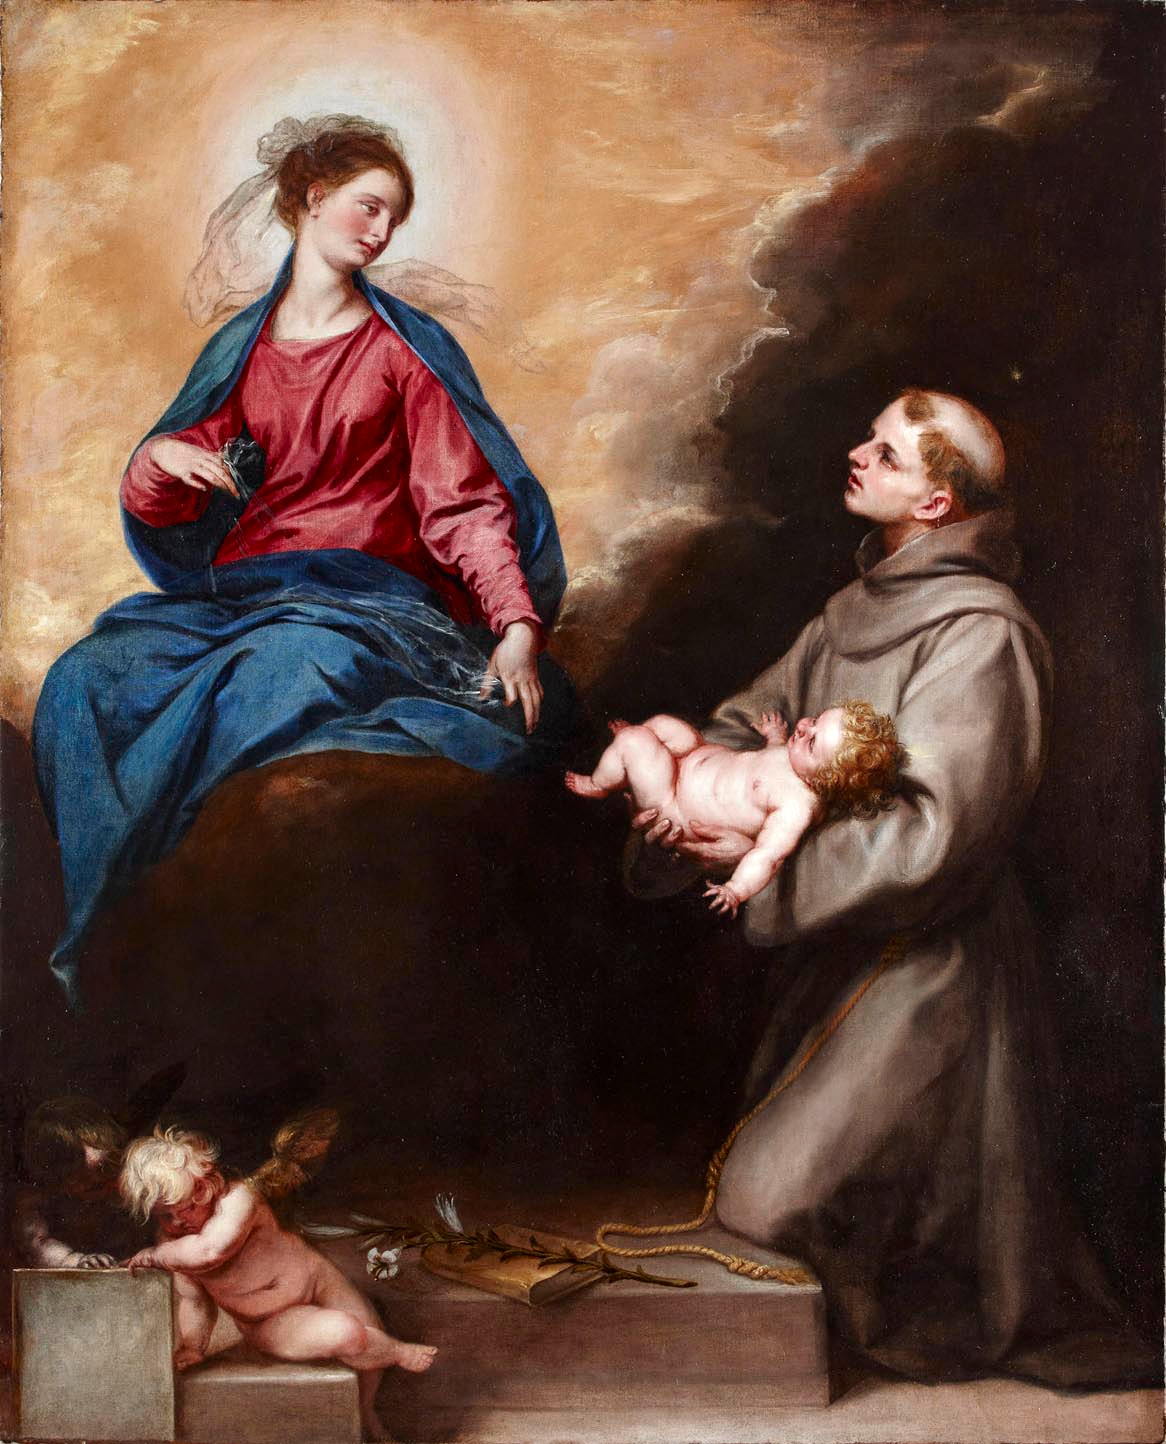 http://uploads7.wikiart.org/images/alonzo-cano/vision-of-st-anthony-of-padua-1662.jpg